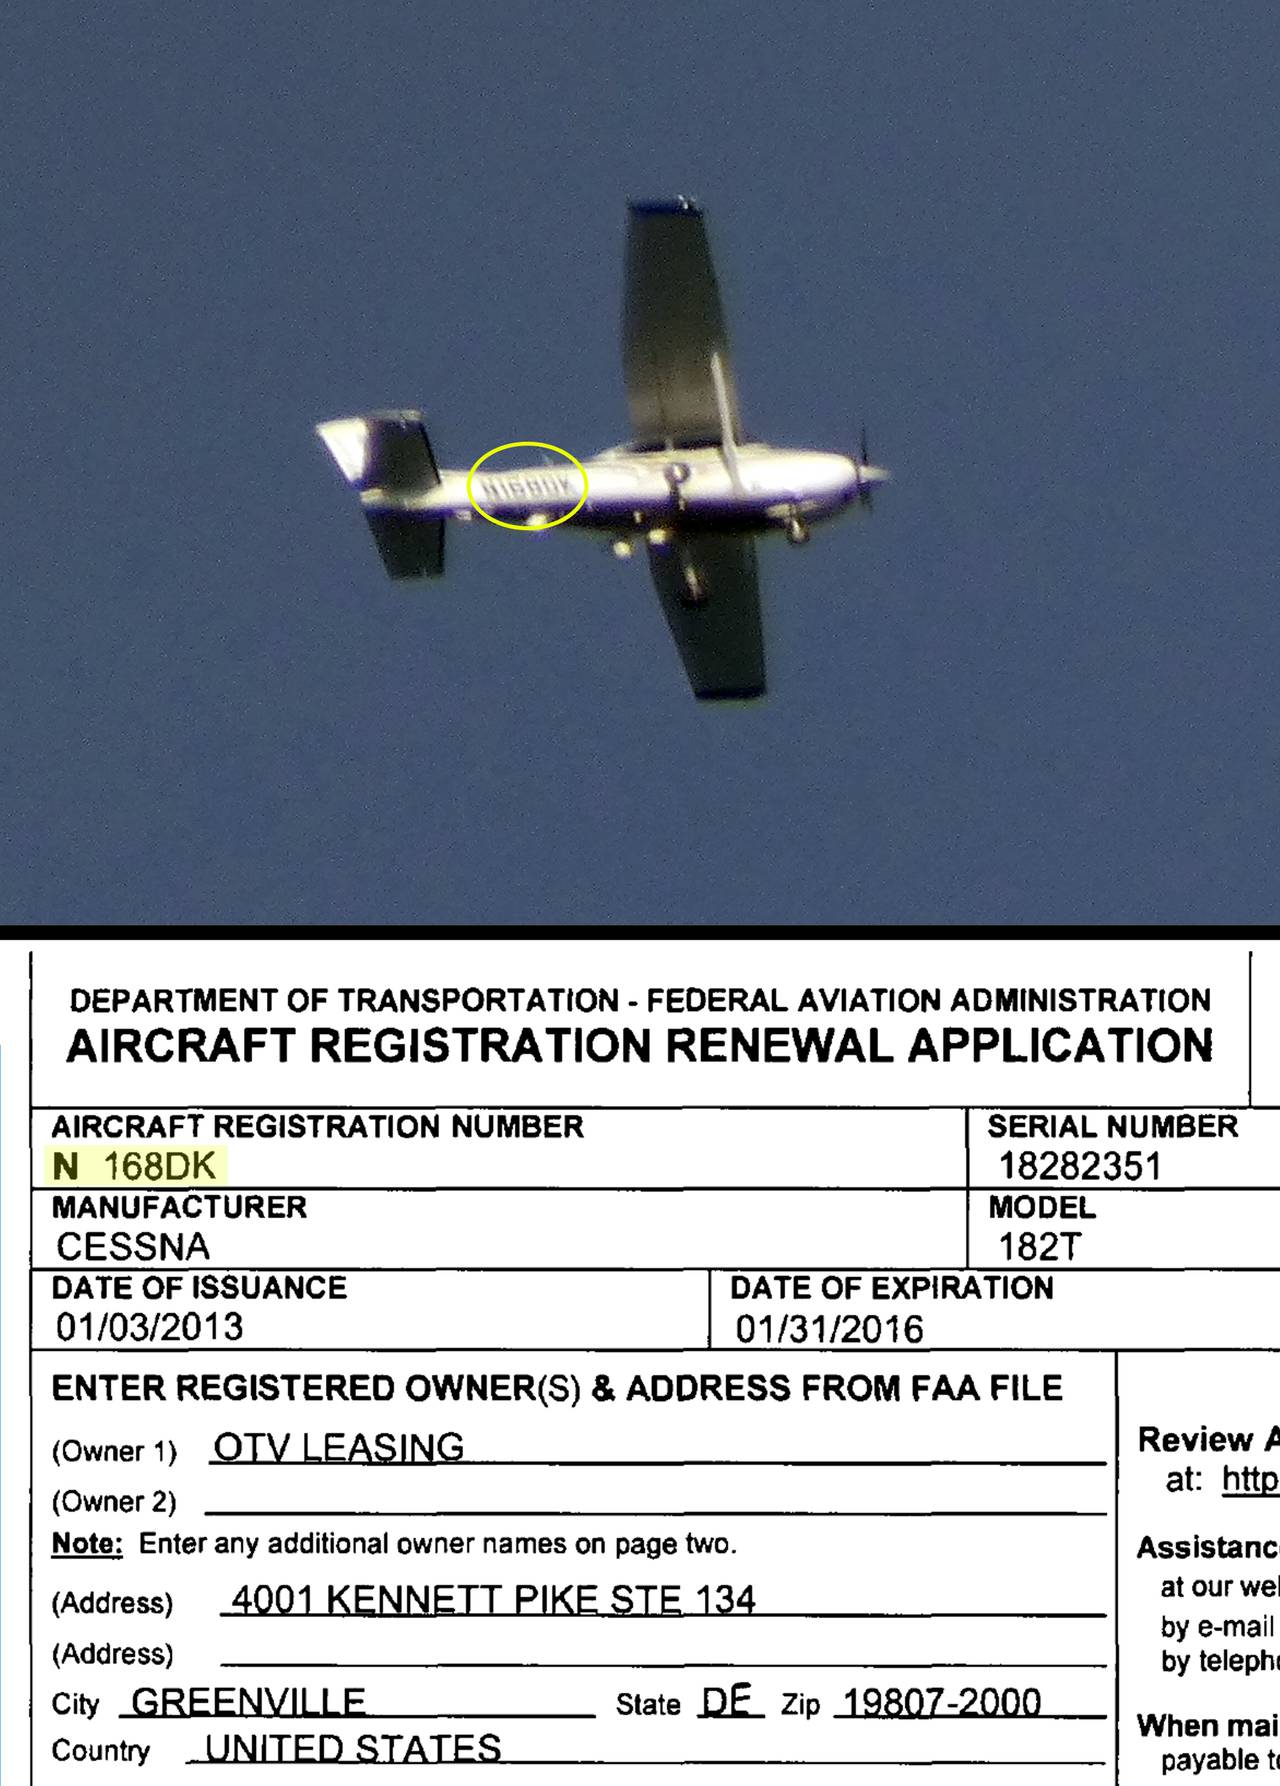 Top: Photo of a plane flying over West Baltimore. Bottom: FAA registration documents.